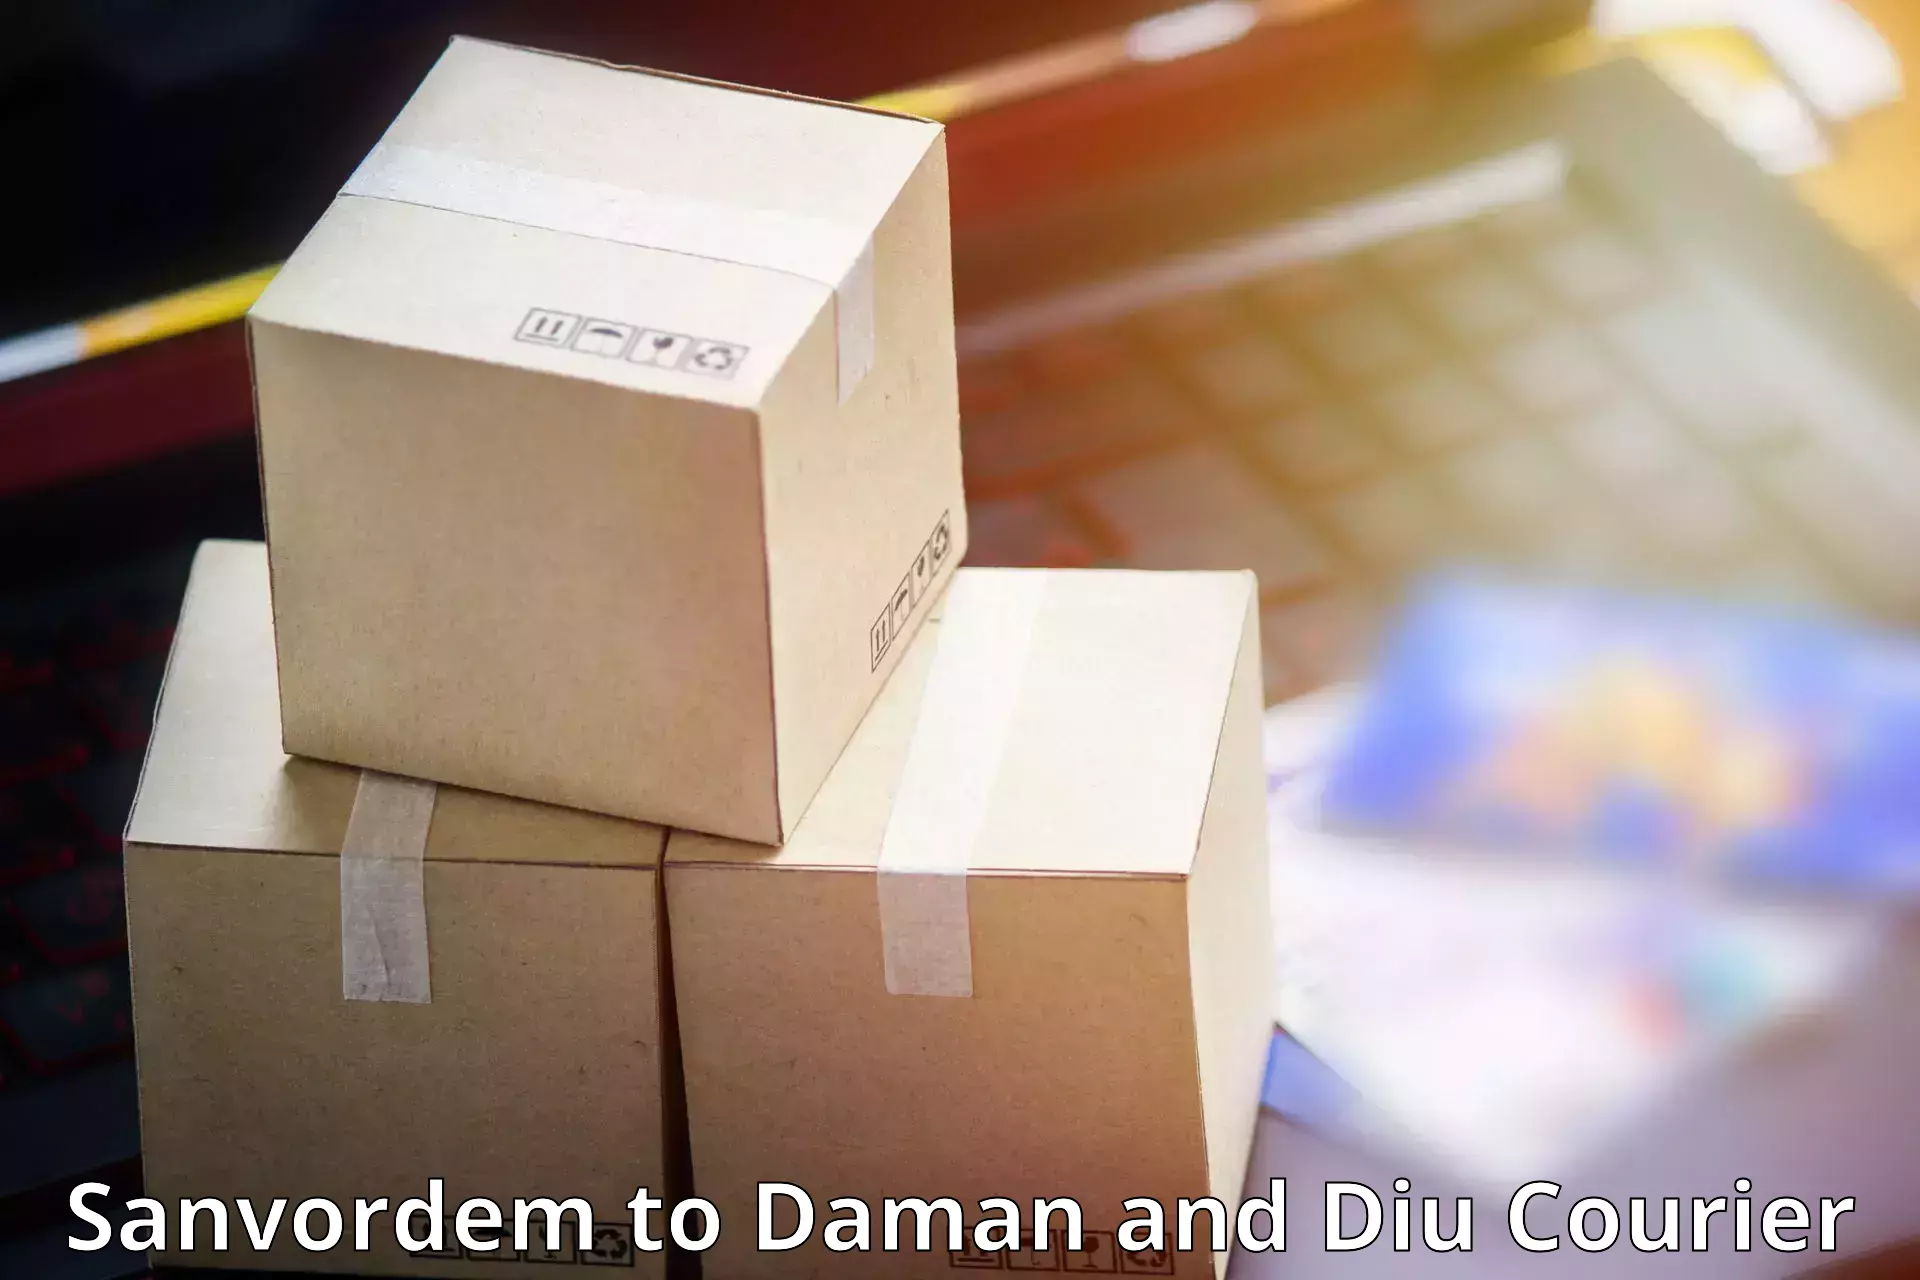 Automated parcel services Sanvordem to Daman and Diu